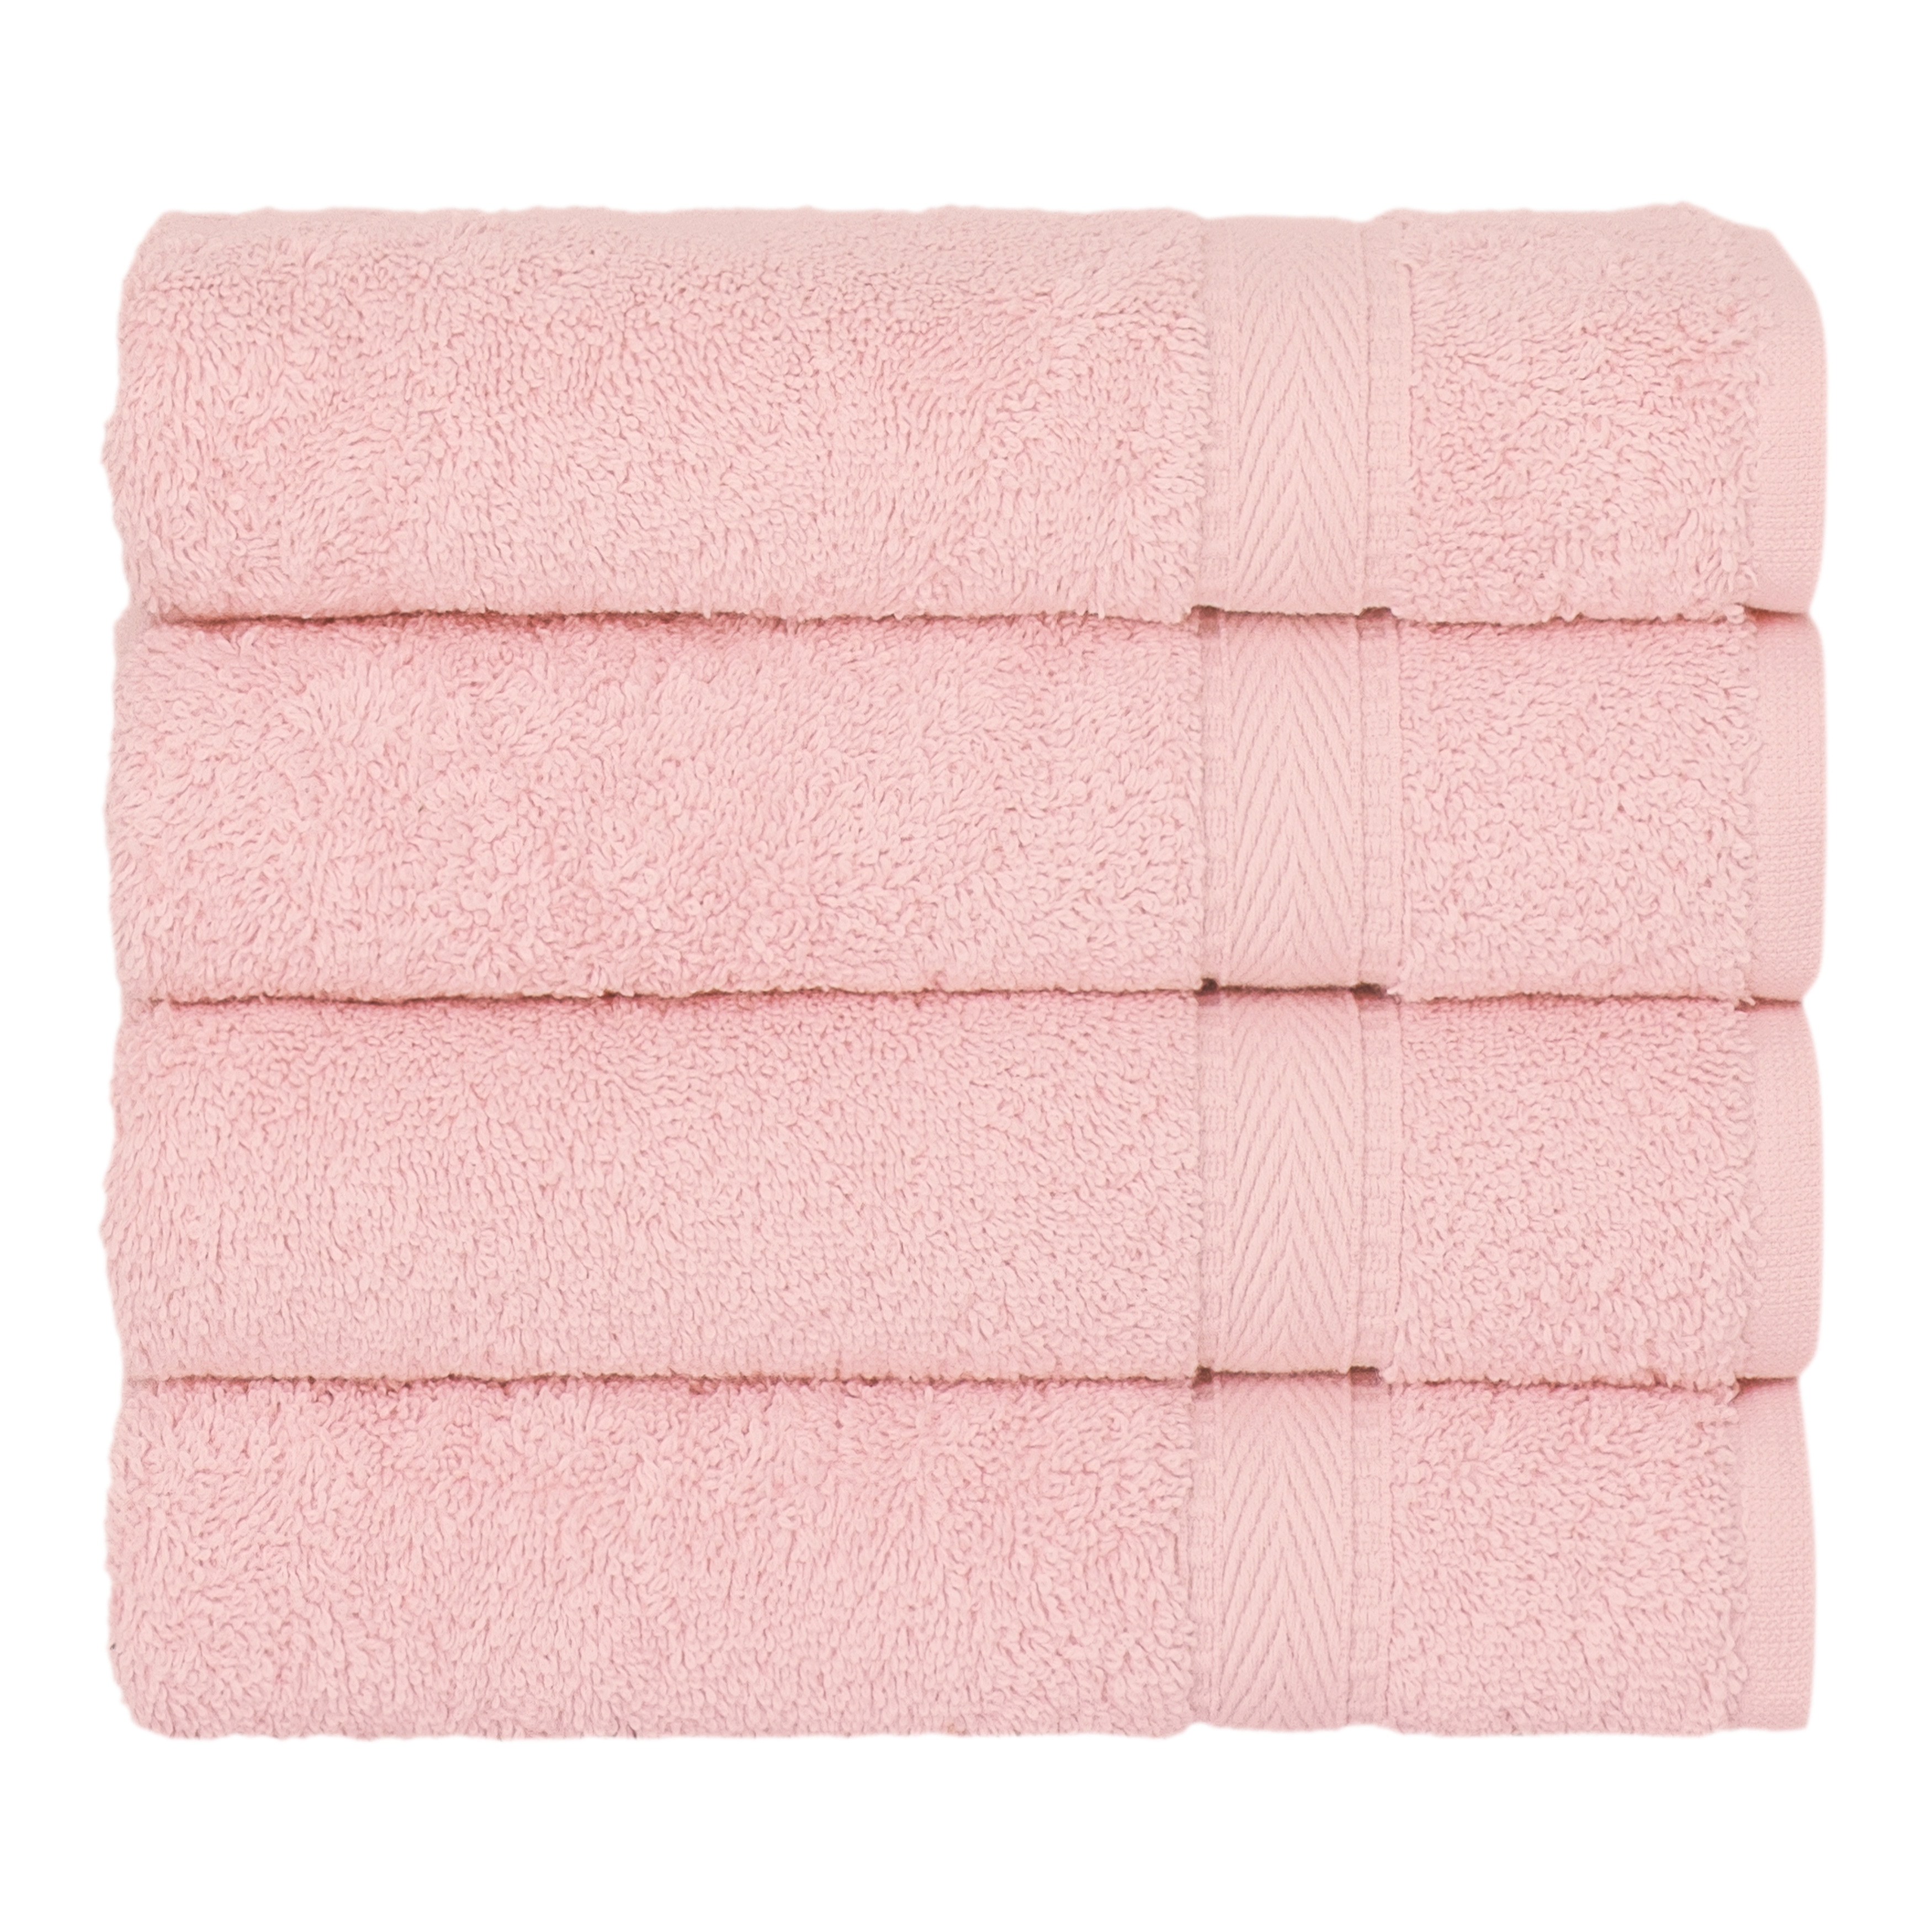 https://ak1.ostkcdn.com/images/products/is/images/direct/6ac95395ea84324a8abfd68f8dd5db617fd36ab5/Authentic-Hotel-Spa-Turkish-Cotton-Hand-Towels-%28Set-of-4%29.jpg